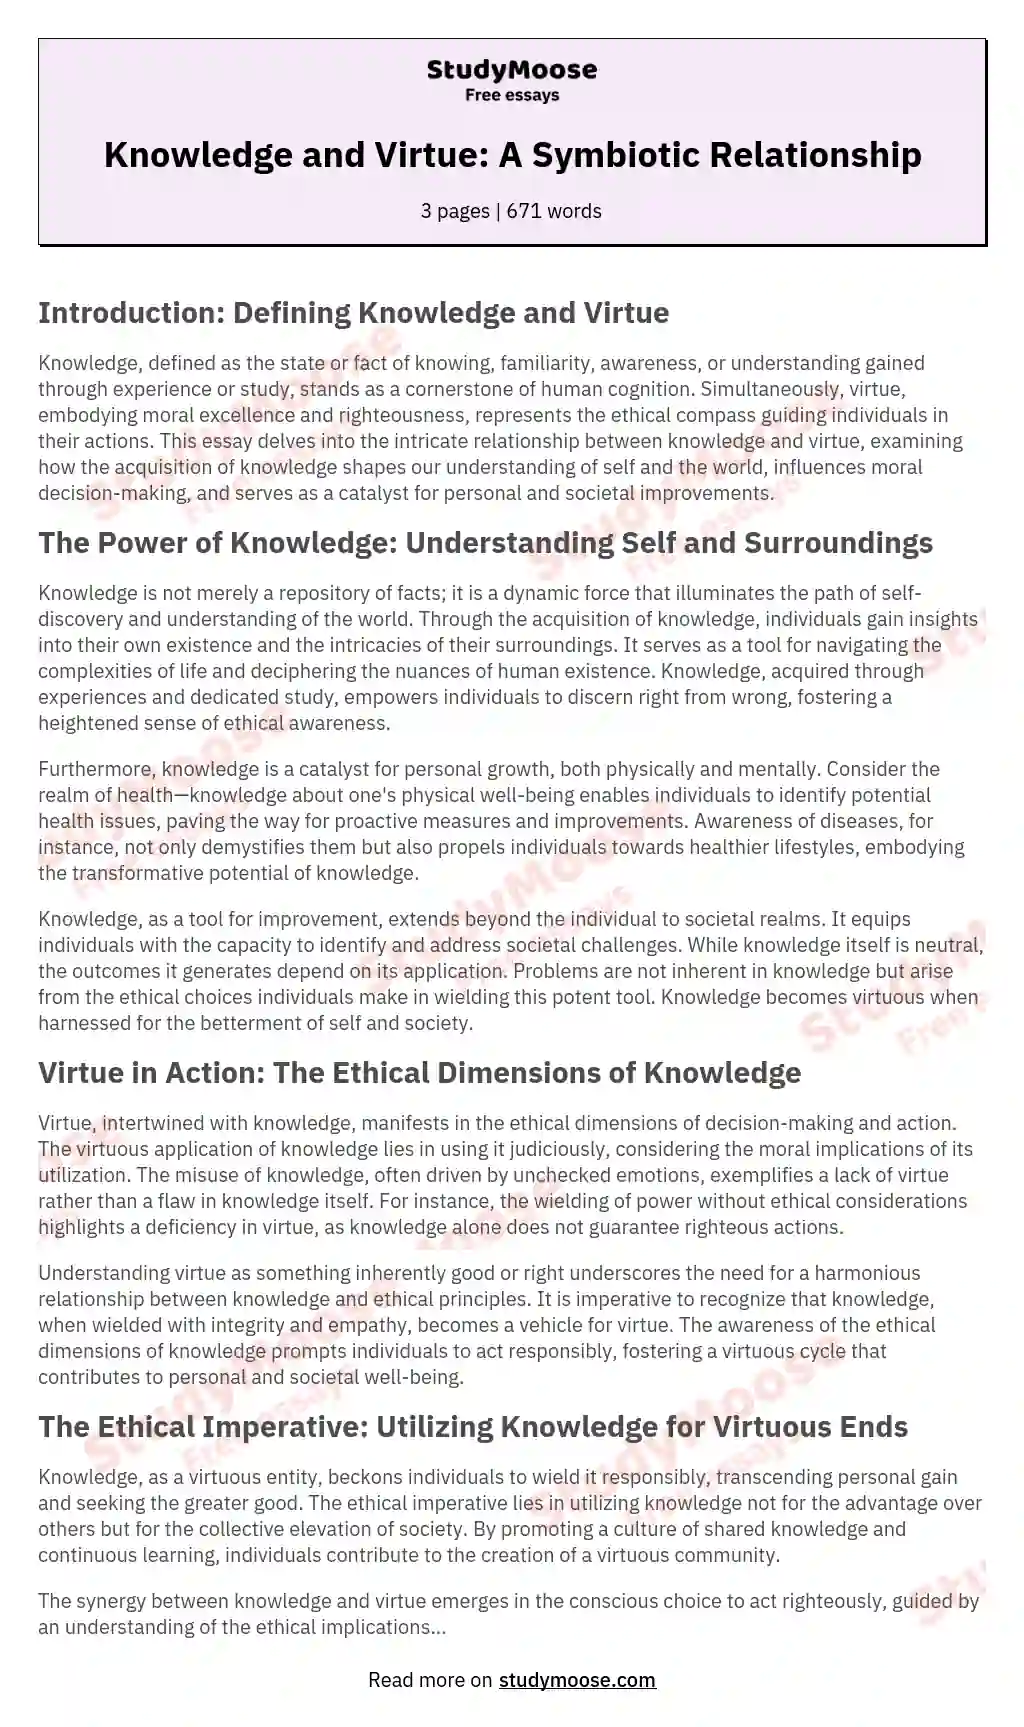 Knowledge and Virtue: A Symbiotic Relationship essay